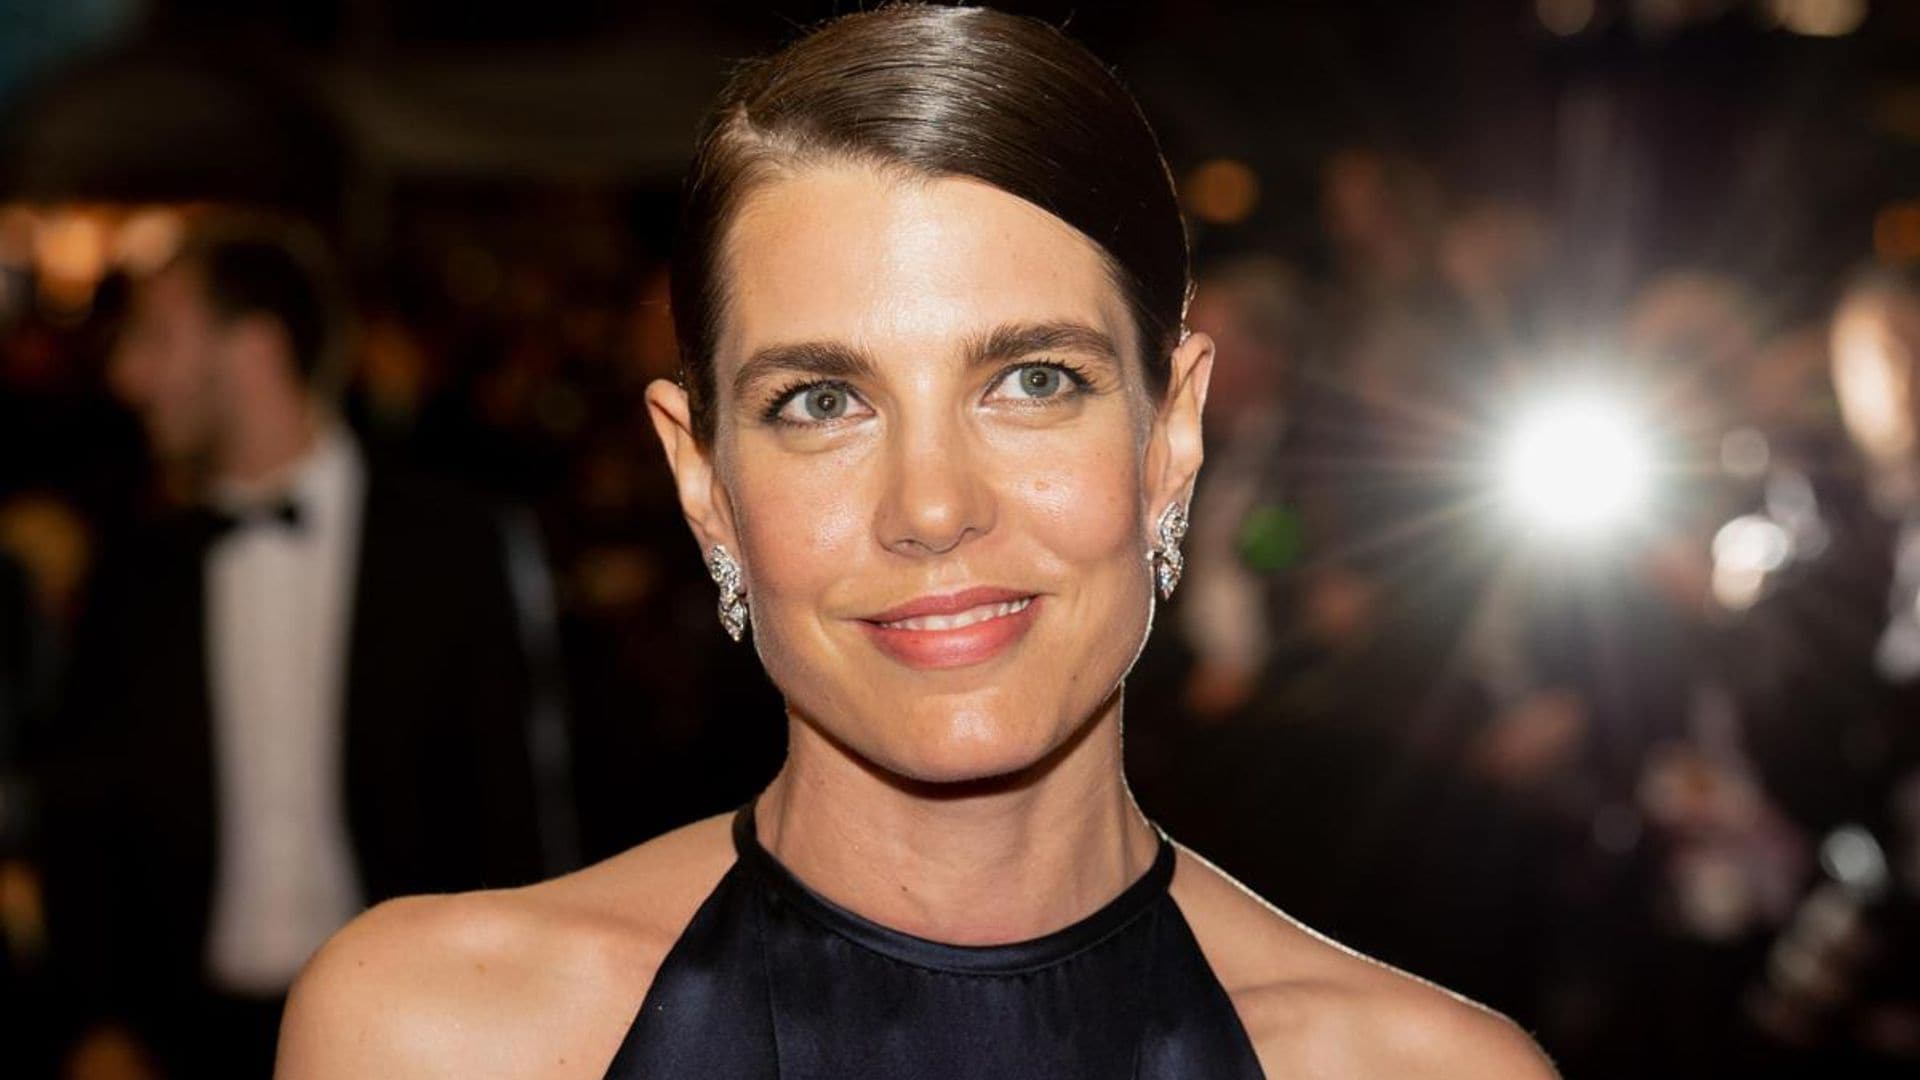 Charlotte Casiraghi is expecting her third child: Report